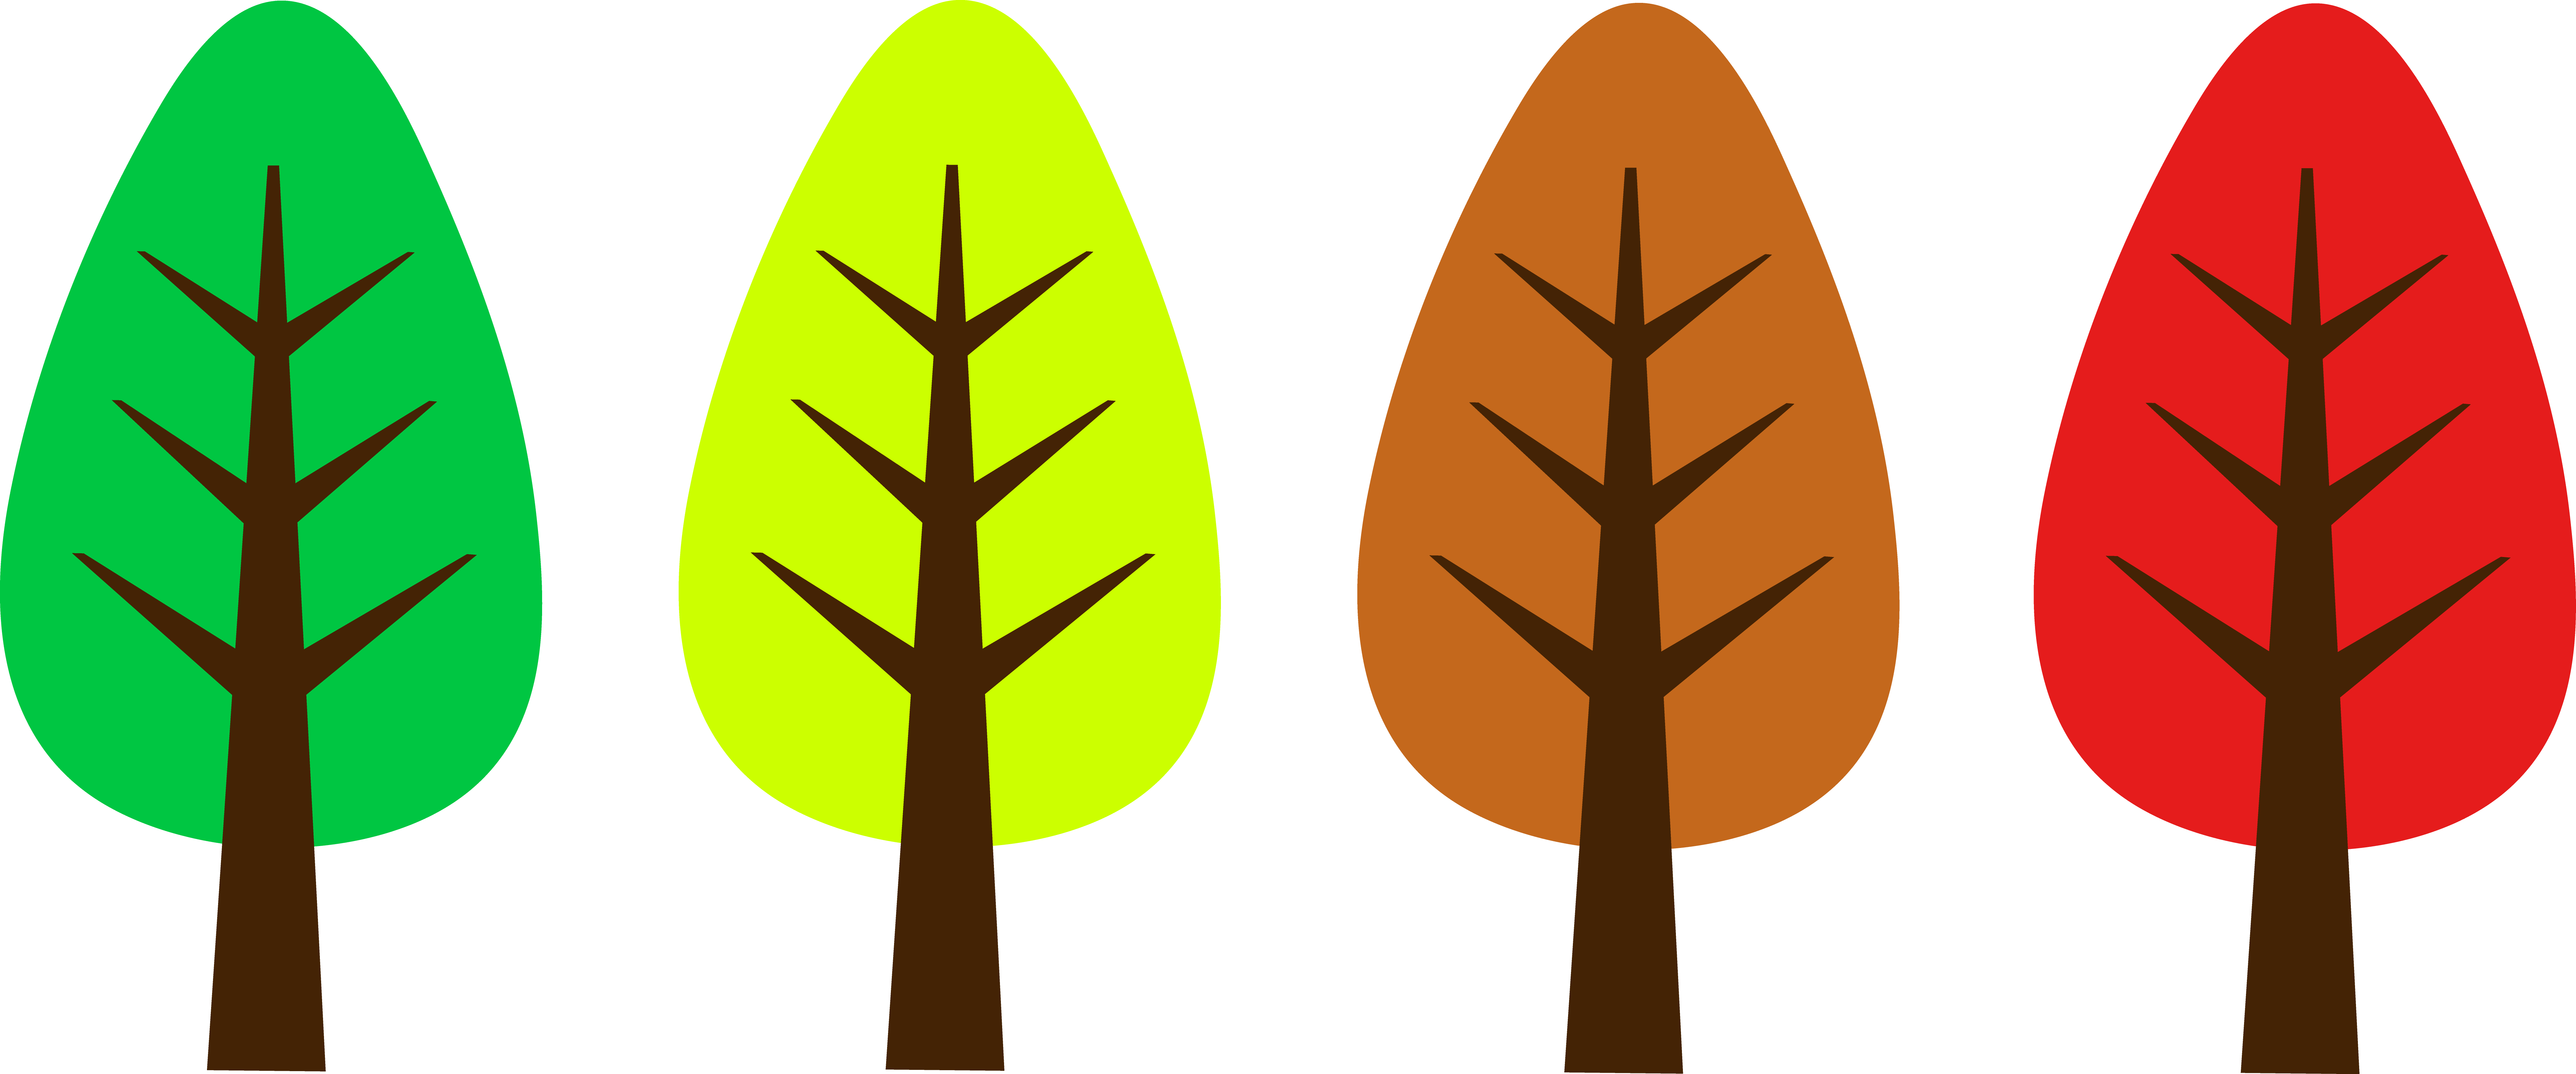 tree clipart download - photo #18